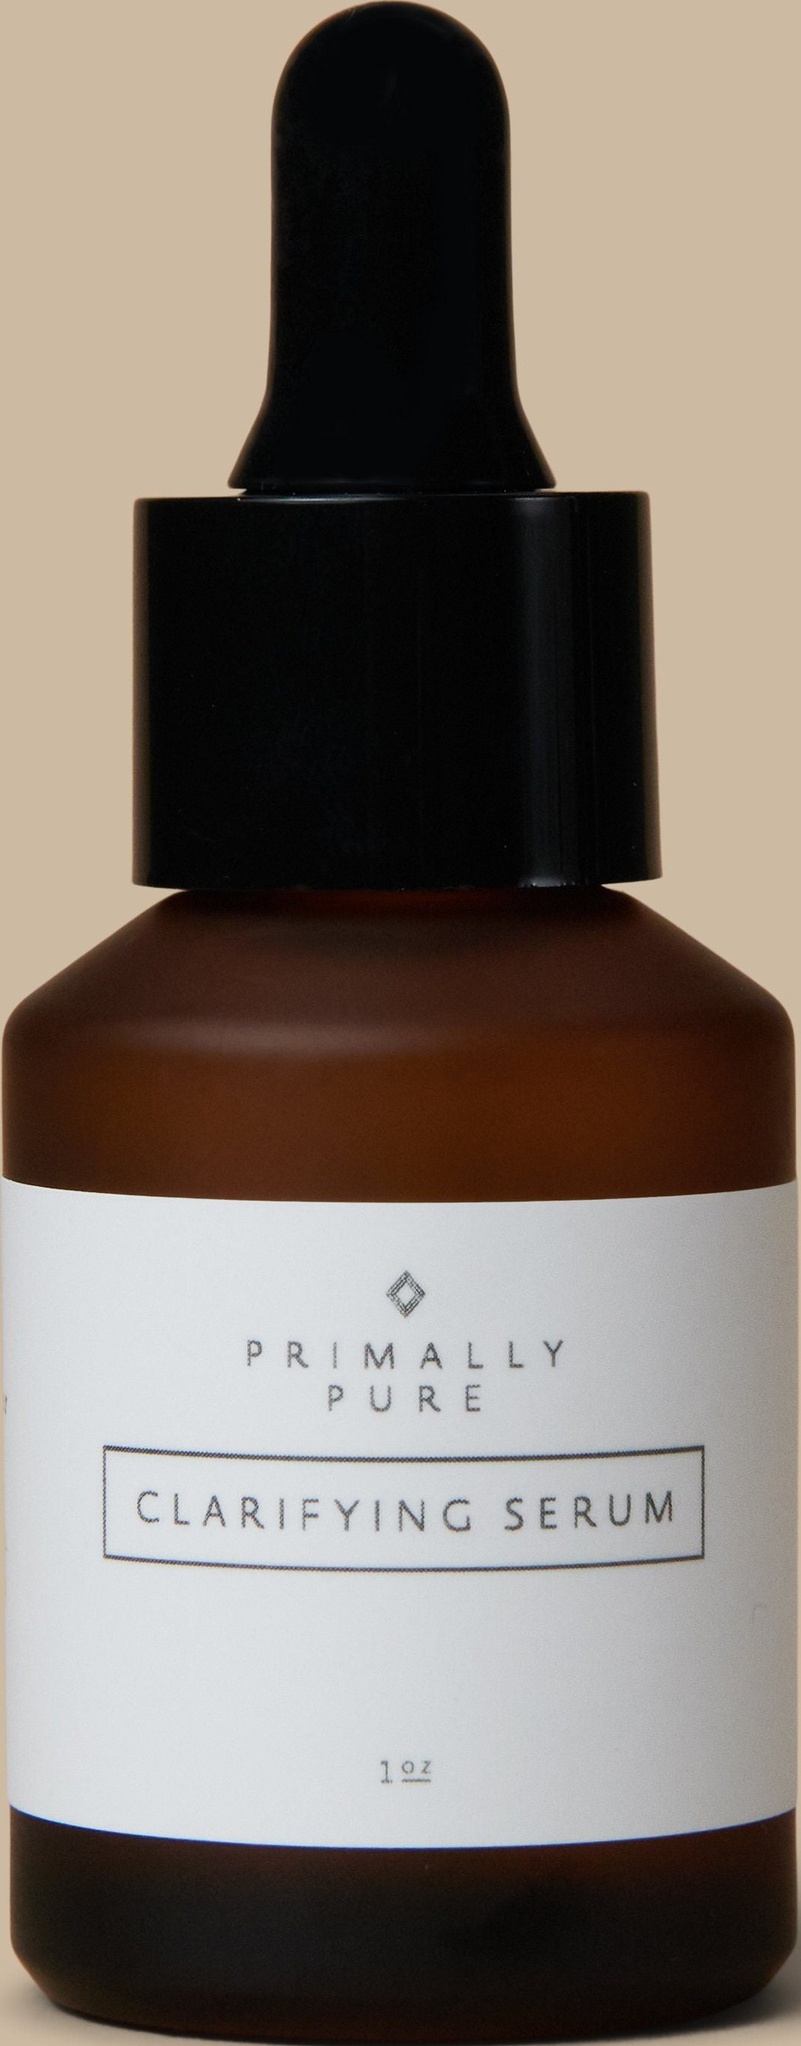 Primally Pure Clarifying Serum ingredients (Explained)